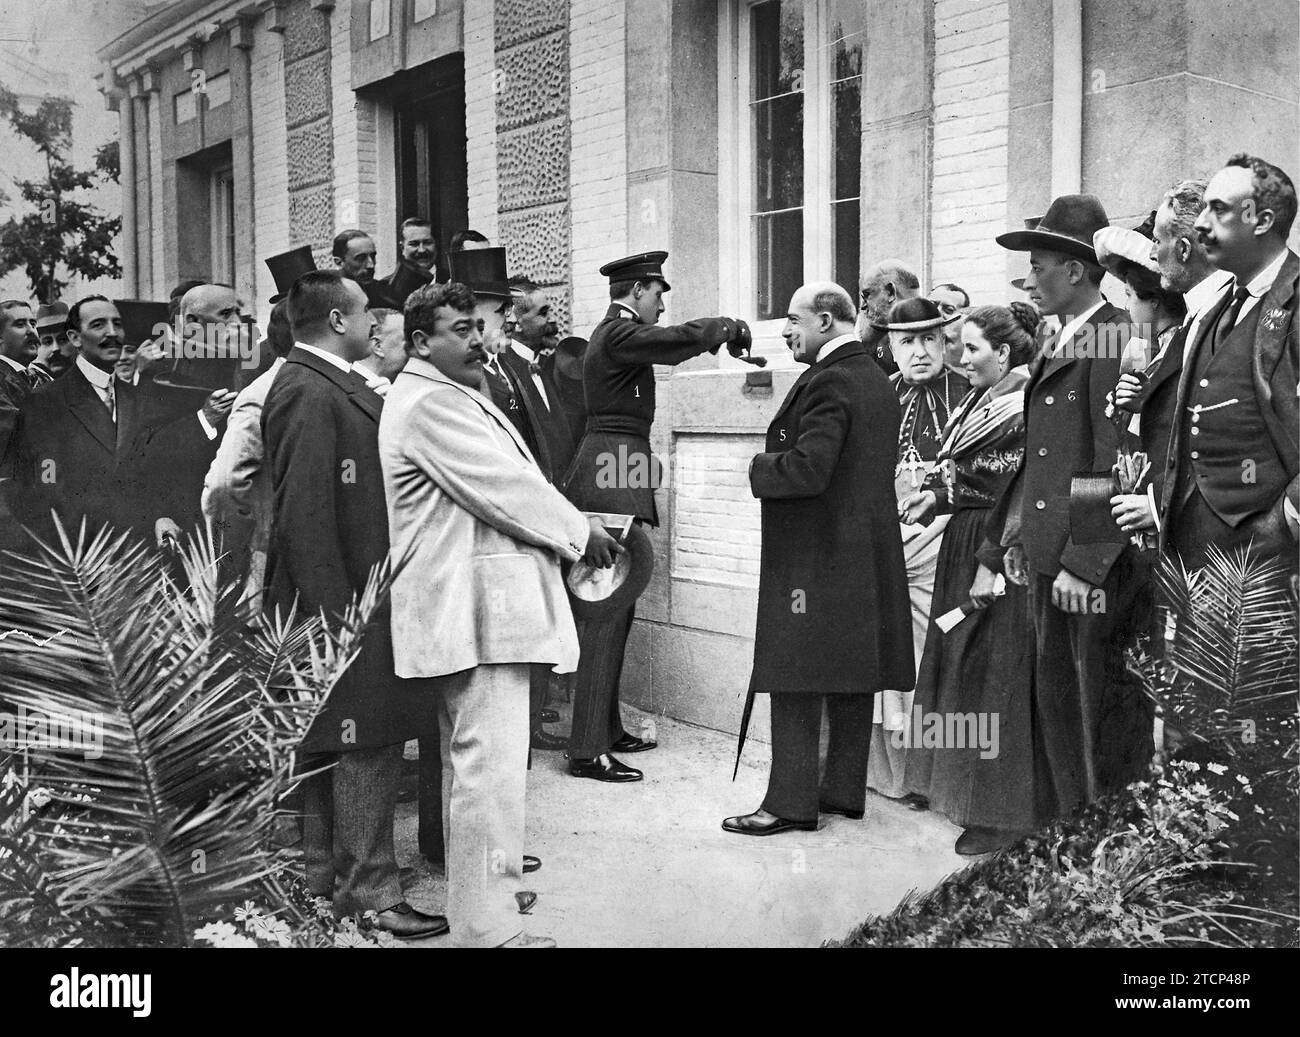 05/17/1912. Solemn delivery of the first ABC Worker House - His Majesty the King Laying the Last Stone of the Building, the President of the Council, Mr. Canalejas (2), the Minister of the Government Mr. Barroso (3), the Bishop of Madrid Alcalá , Mr. José María Salvador y Barrera (4) who blessed the House, the director Torcuato Luca de Tena (5), the worker Juan Suárez Cardador (6), who was blessed with the house accompanied by his wife Petra Díaz Martínez (7 ). Credit: Album / Archivo ABC / Francisco Goñi Stock Photo